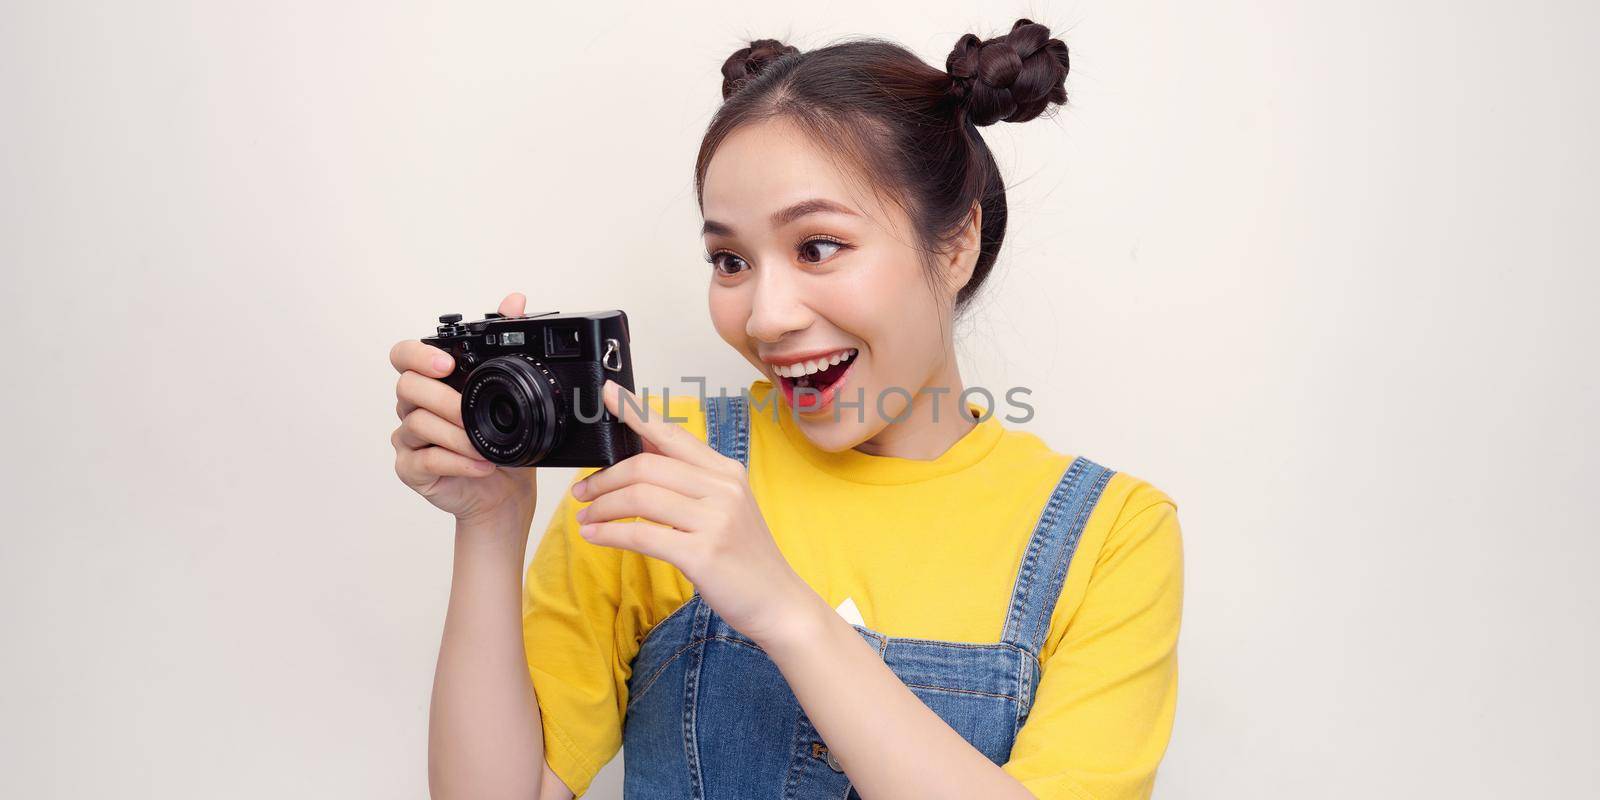 Beautiful young woman taking photo with digital camera, against white background.